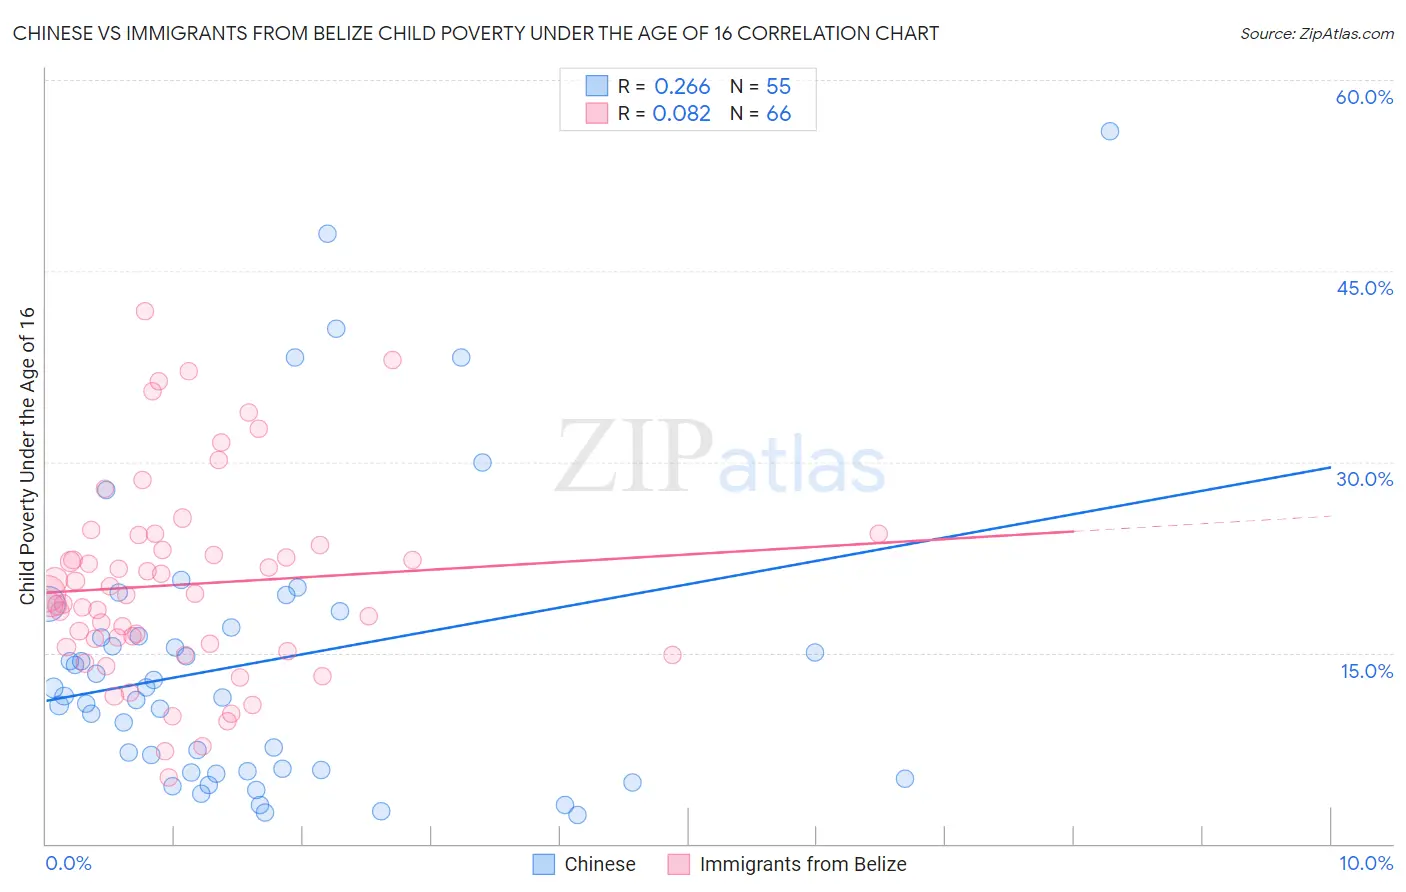 Chinese vs Immigrants from Belize Child Poverty Under the Age of 16